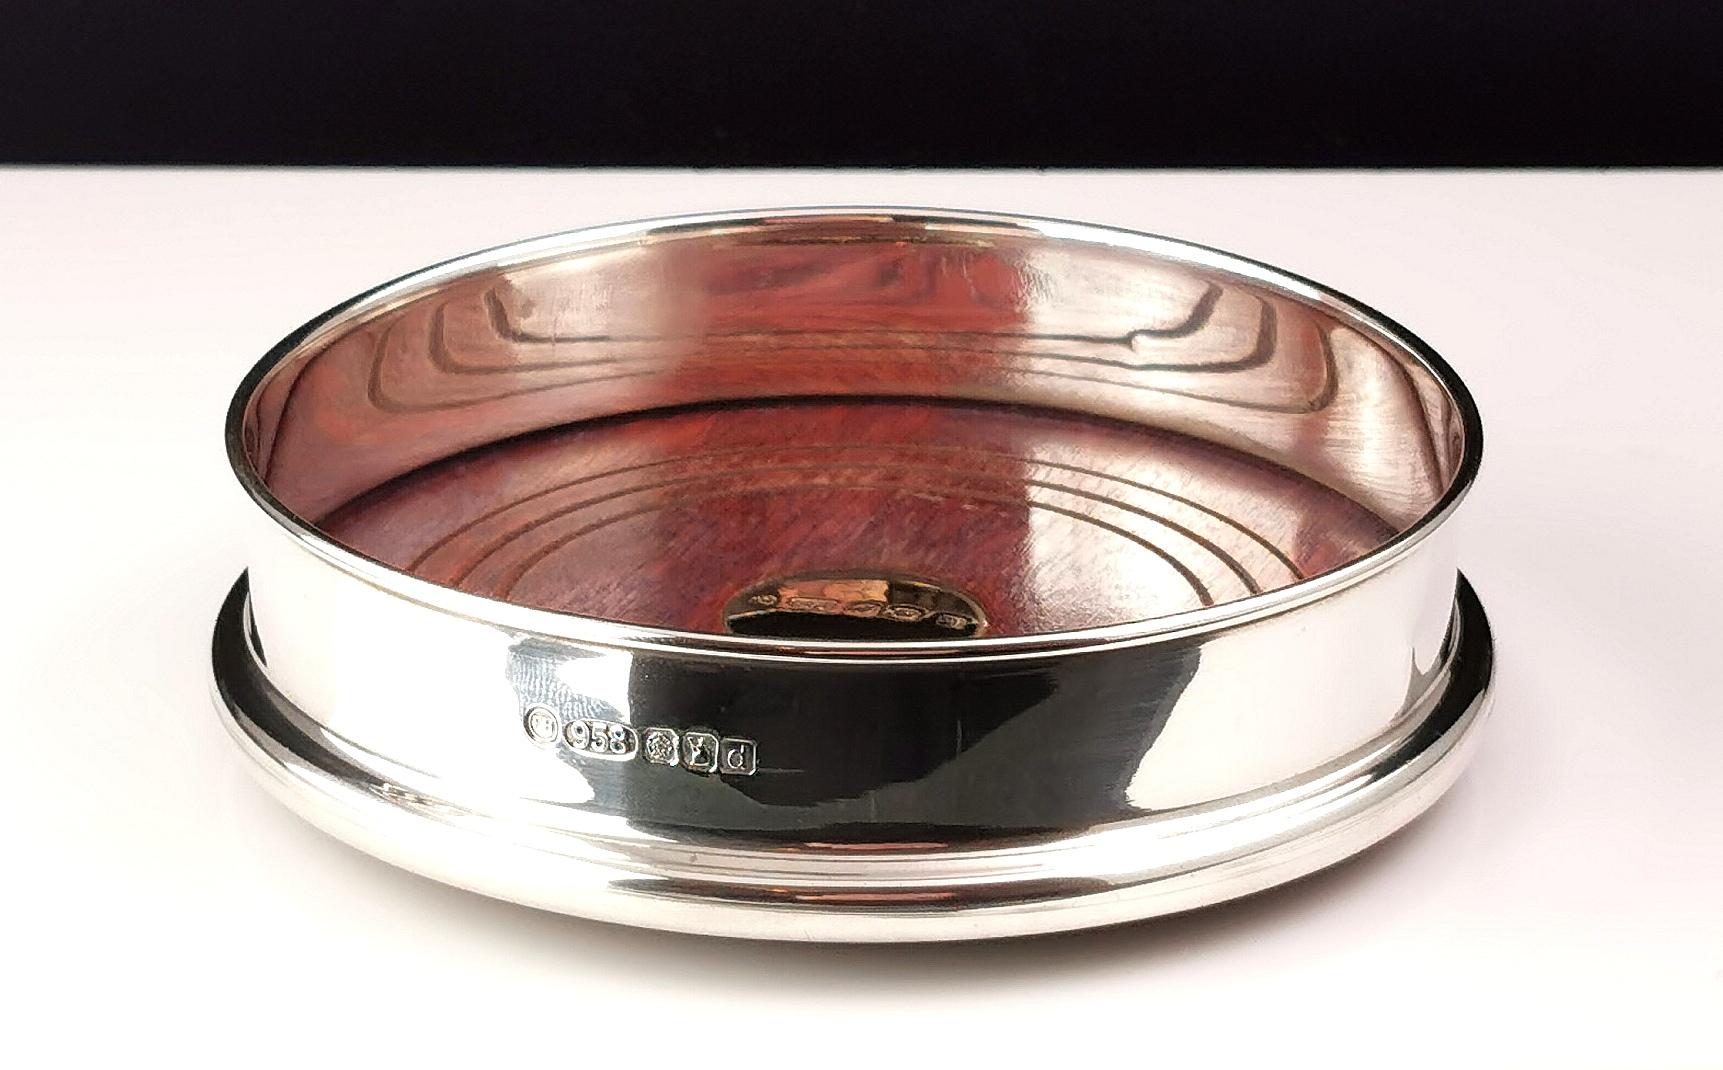 A very fine vintage Britannia silver wine or bottle coaster.

Made from 958 silver with a hardwood base set with a 9ct yellow gold roundel to the centre.

The base is covered with a green felt to protect the surface it stands on.

It is a stylish